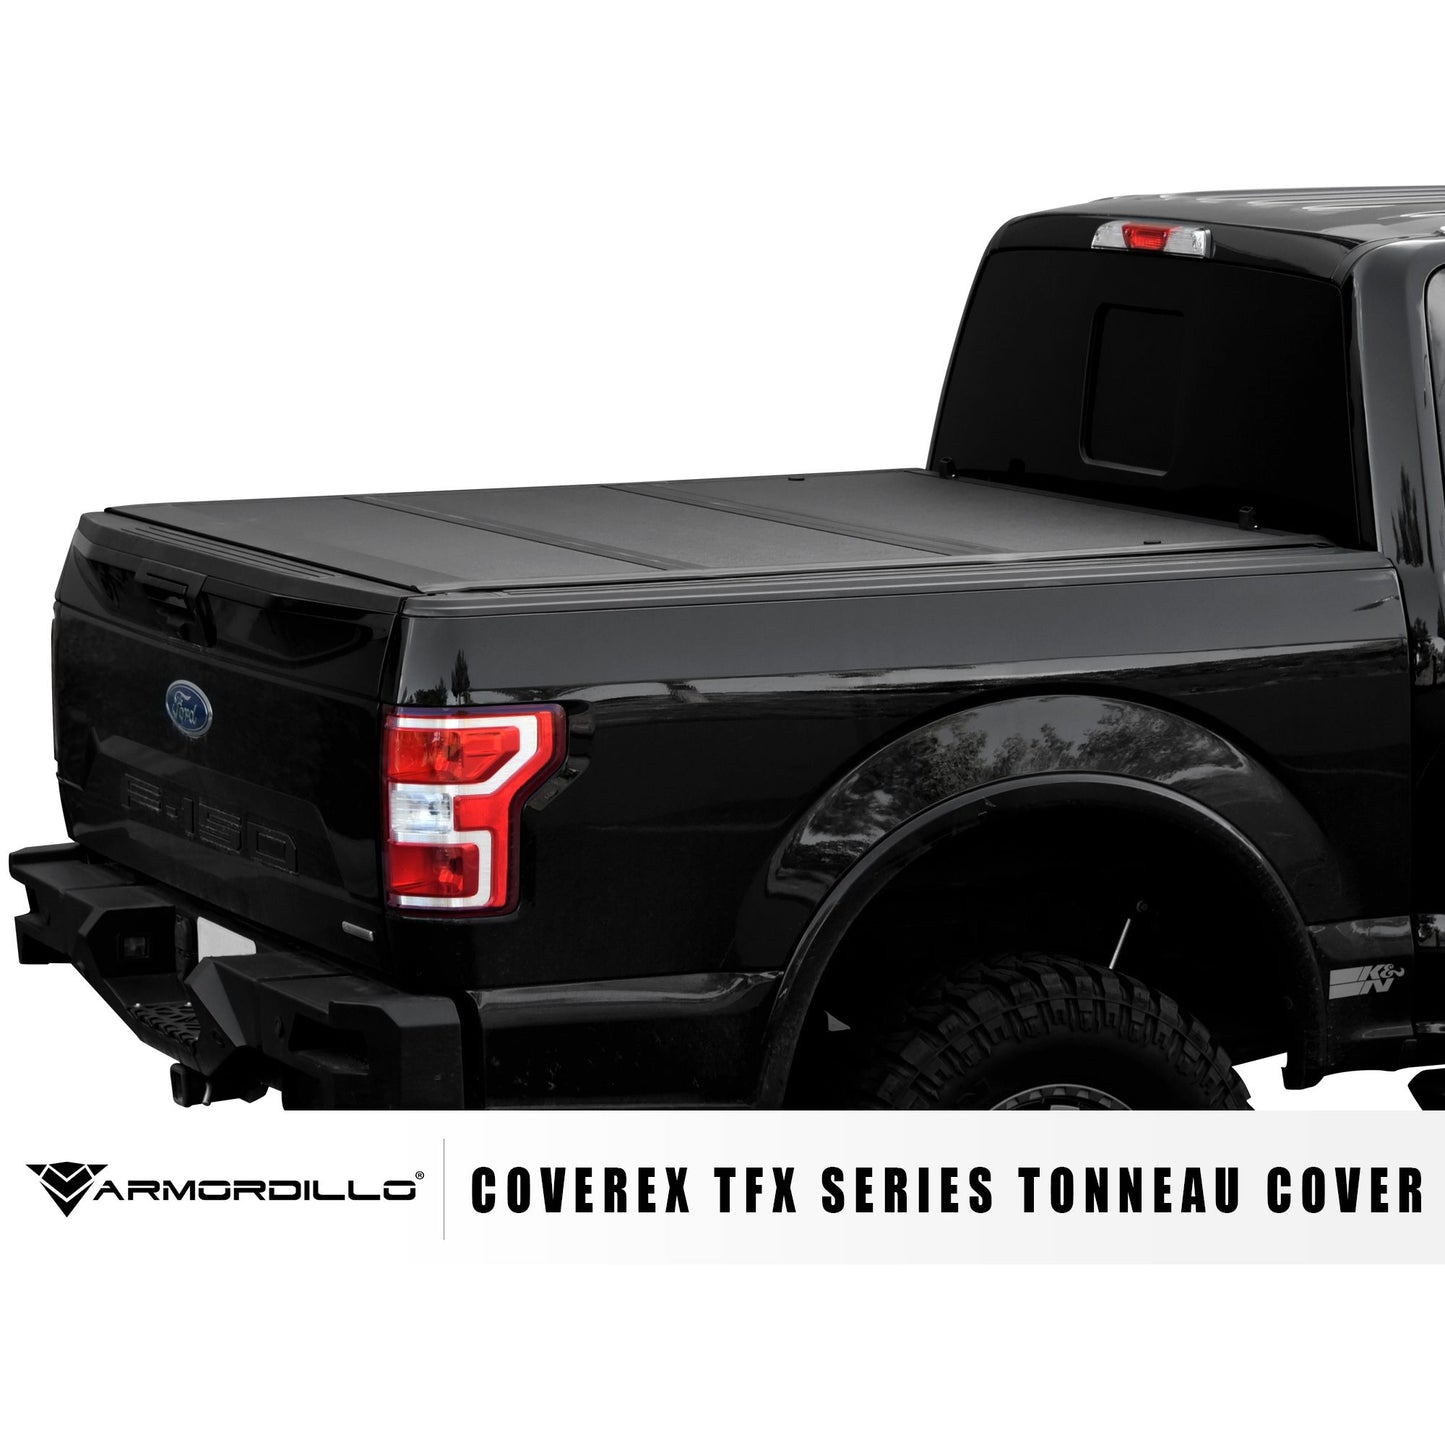 Armordillo 2004-2006 Toyota Tundra CoveRex TFX Series Folding Truck Bed Tonneau Cover (6.4 Ft Bed) 8705353